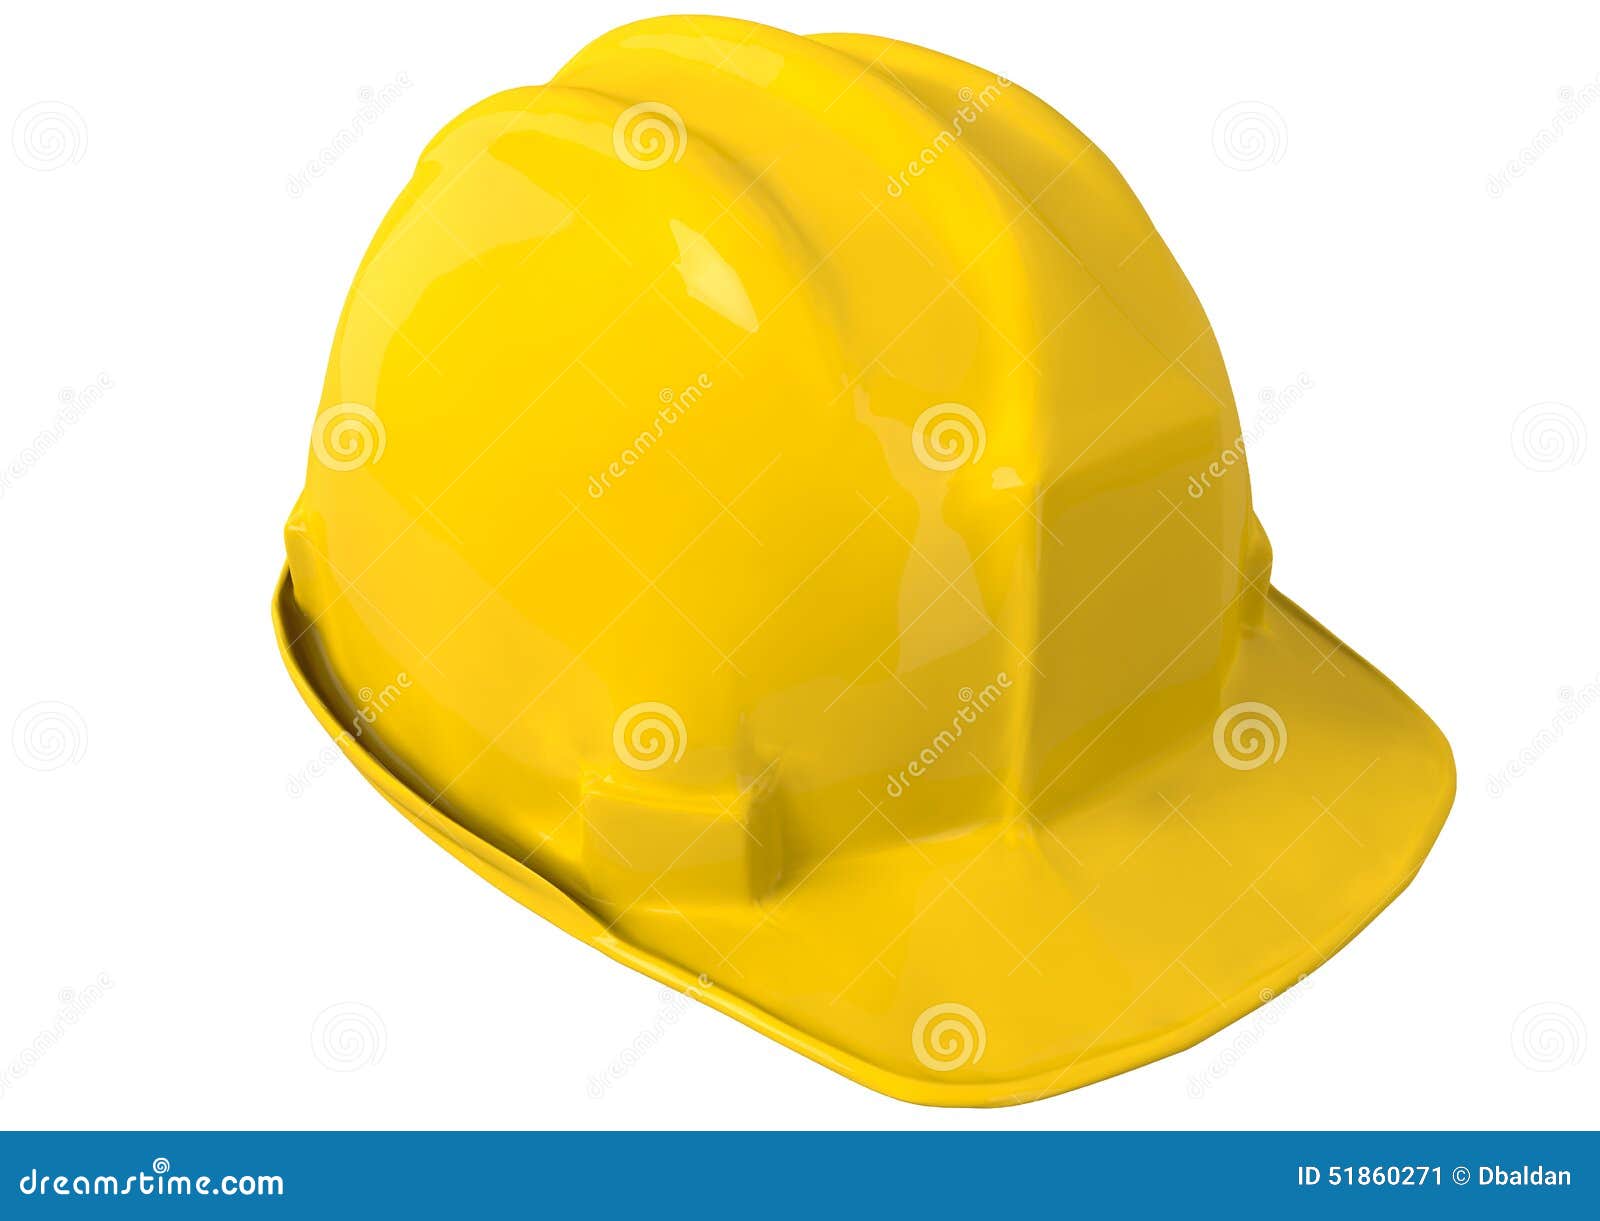 Yellow Safety Helmet Or Hard Hat On White Background Stock Image Image Of Object Helmet 51860271